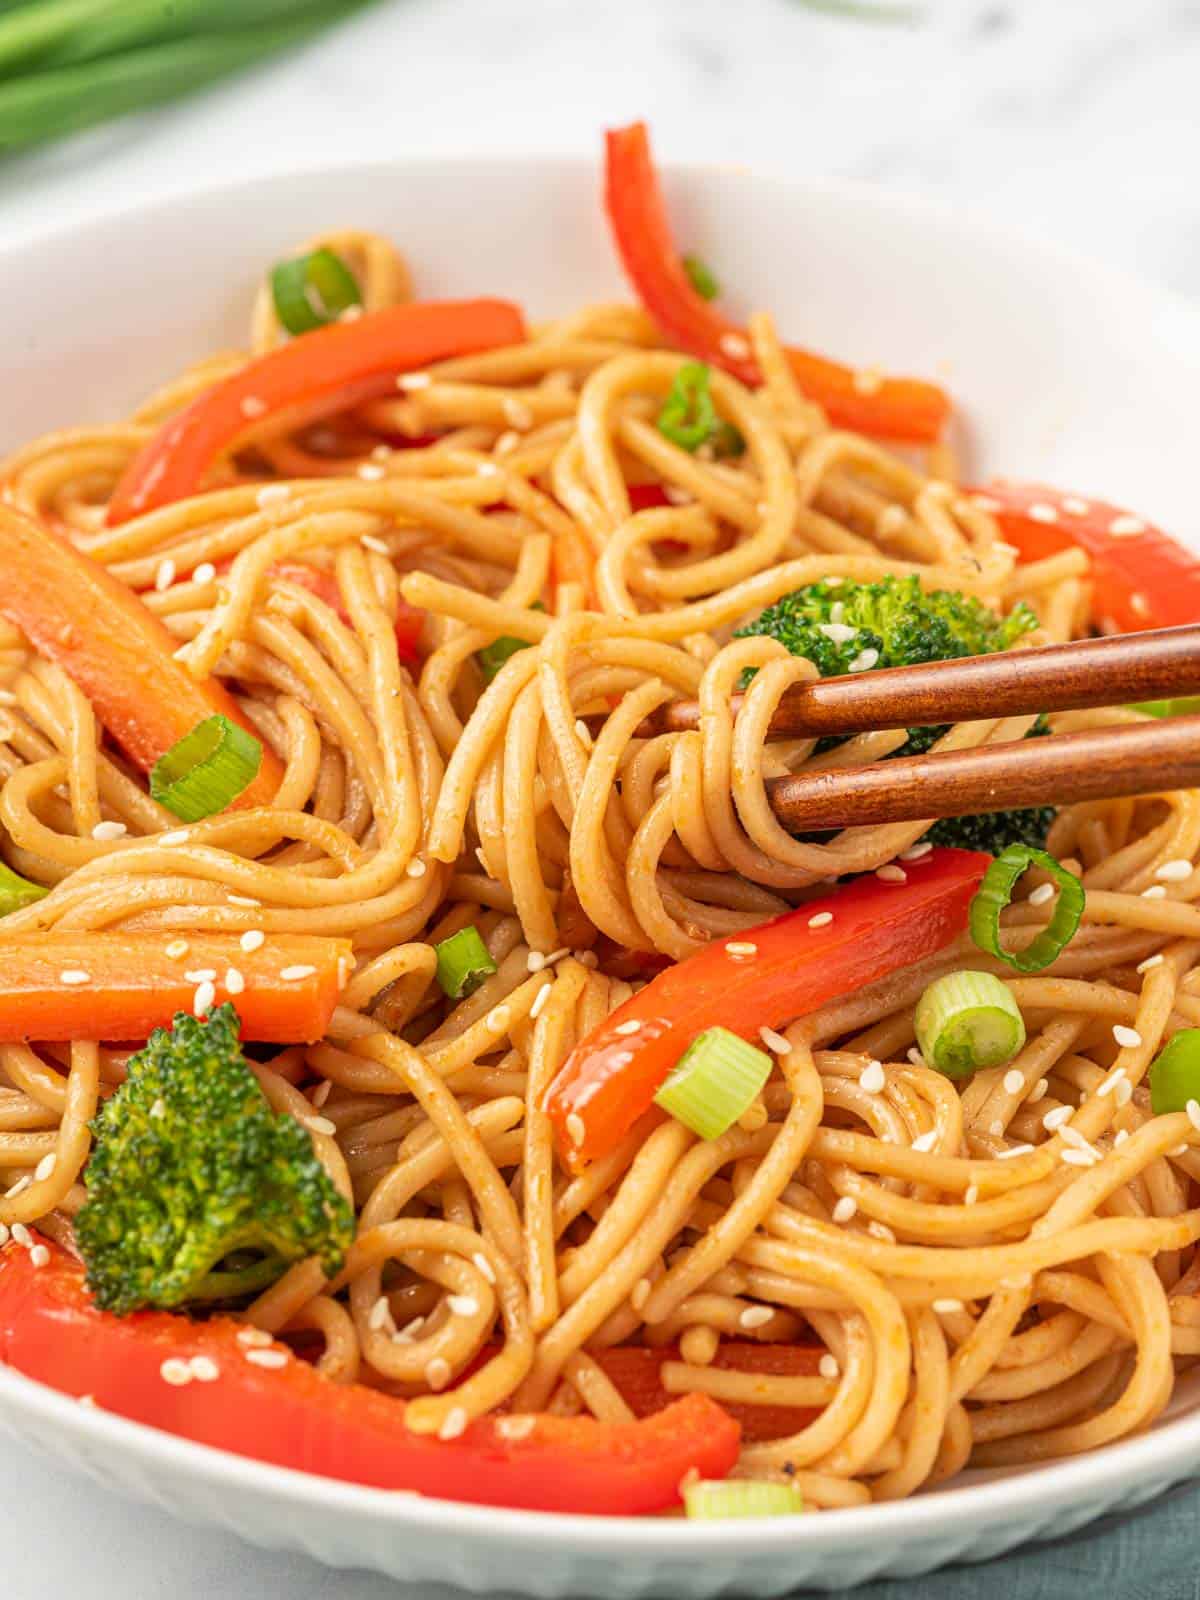 Vegetarian lo mein noodles in a bowl with chopsticks.